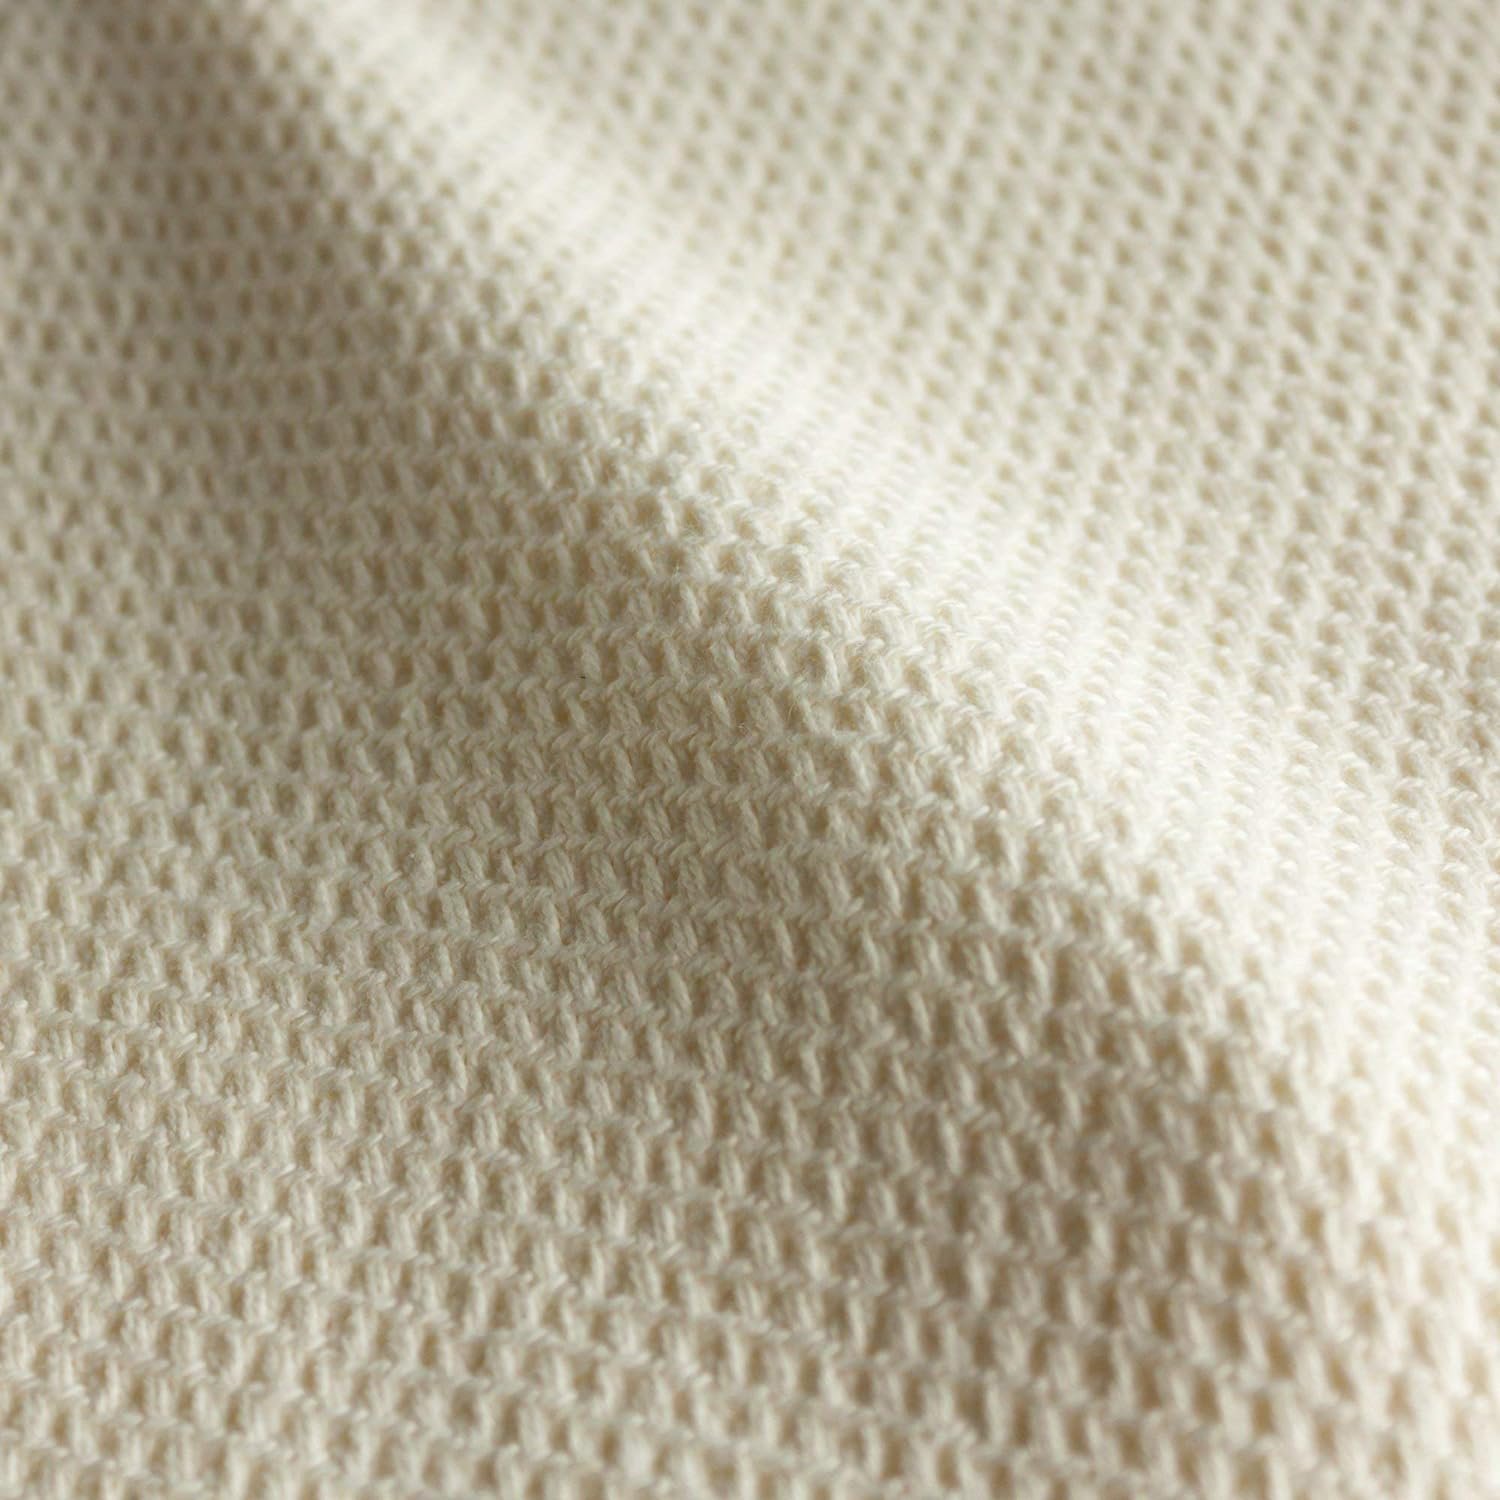 Body Linen Organic Cotton Basket Weave Massage Table Blanket, 100% Organic Cotton, 66 by 90 Inches, Pleasant Cream Color. Warm, Soft and Eco-Friendly - 1 Pack